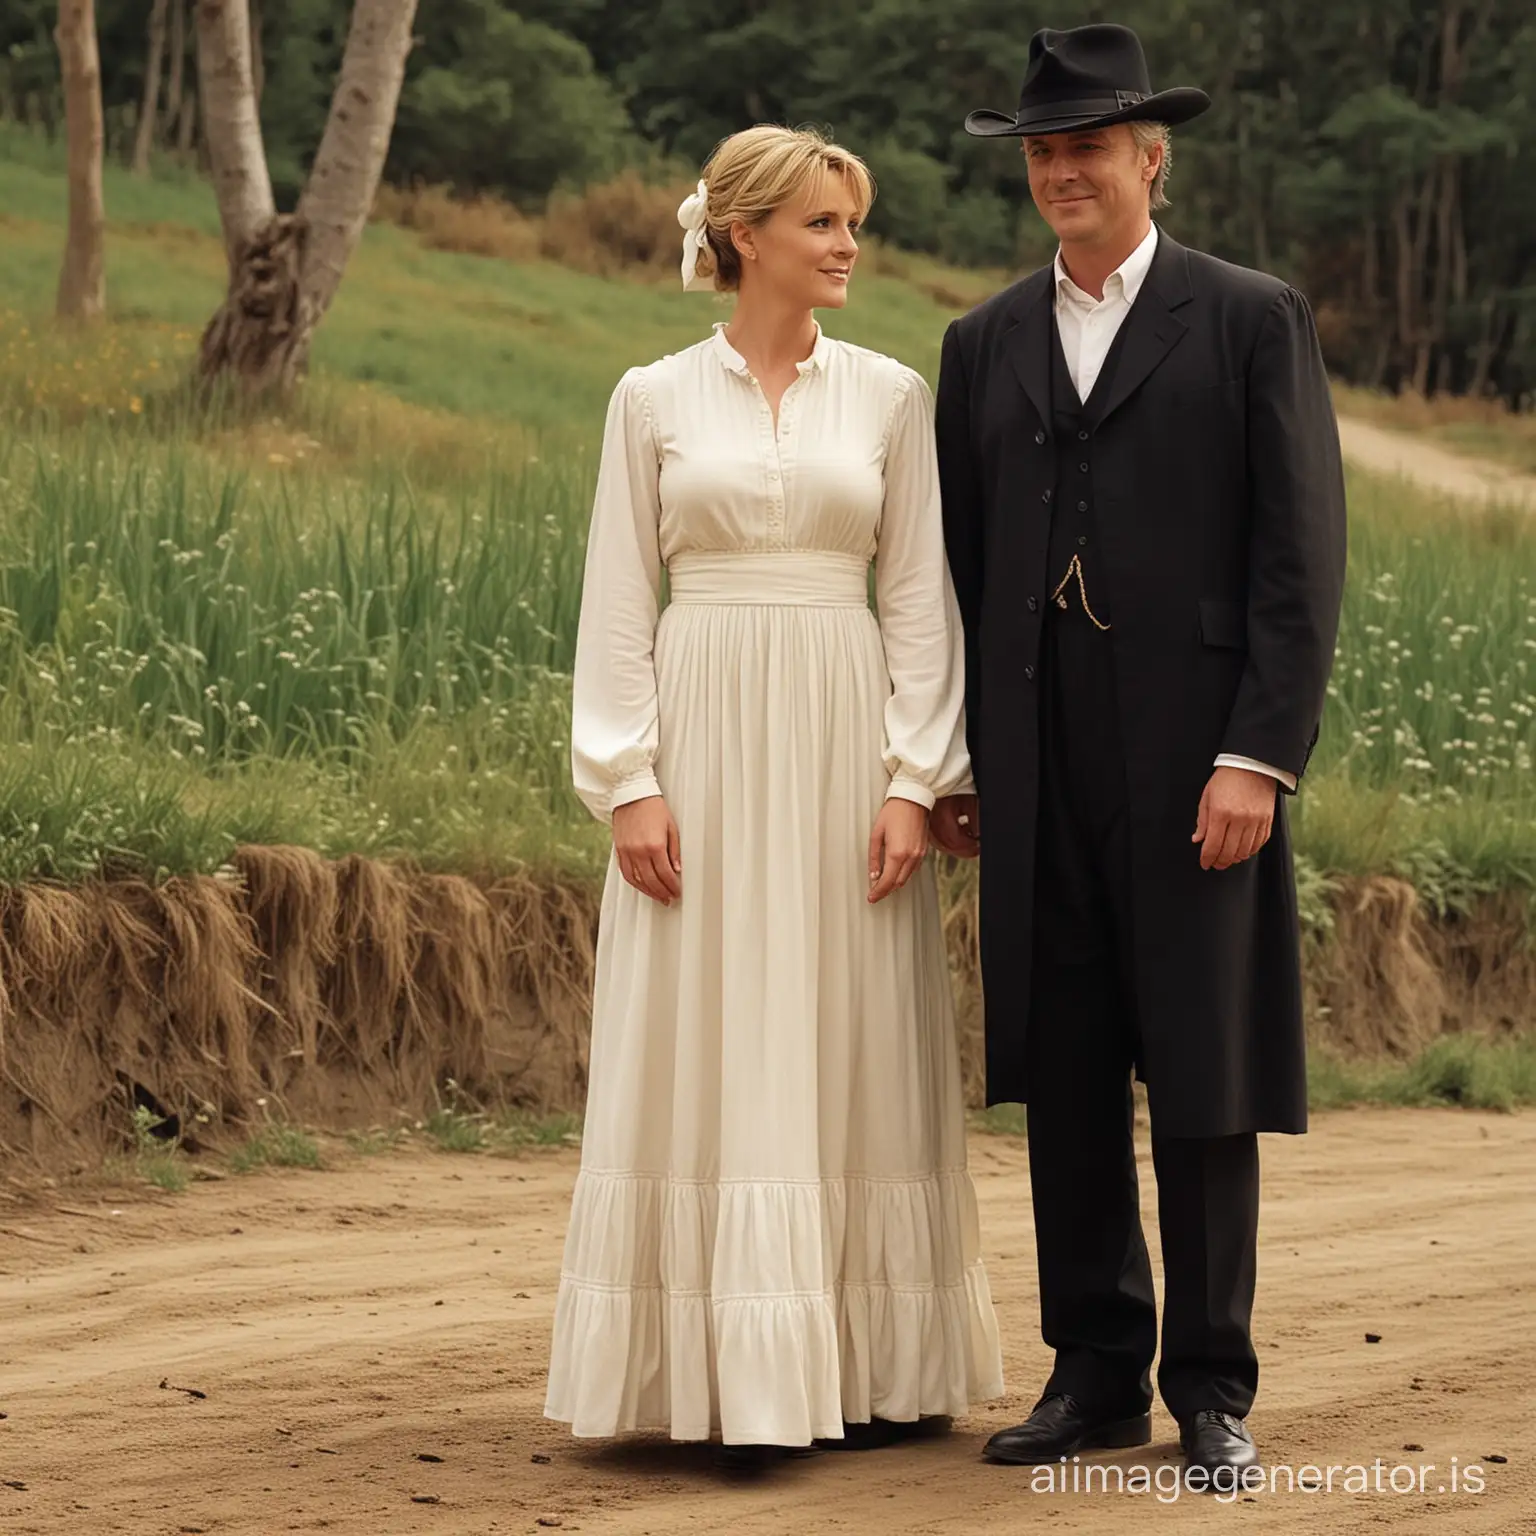 Amanda-Tapping-as-Samantha-Carter-Dressed-as-a-Demure-Amish-Wife